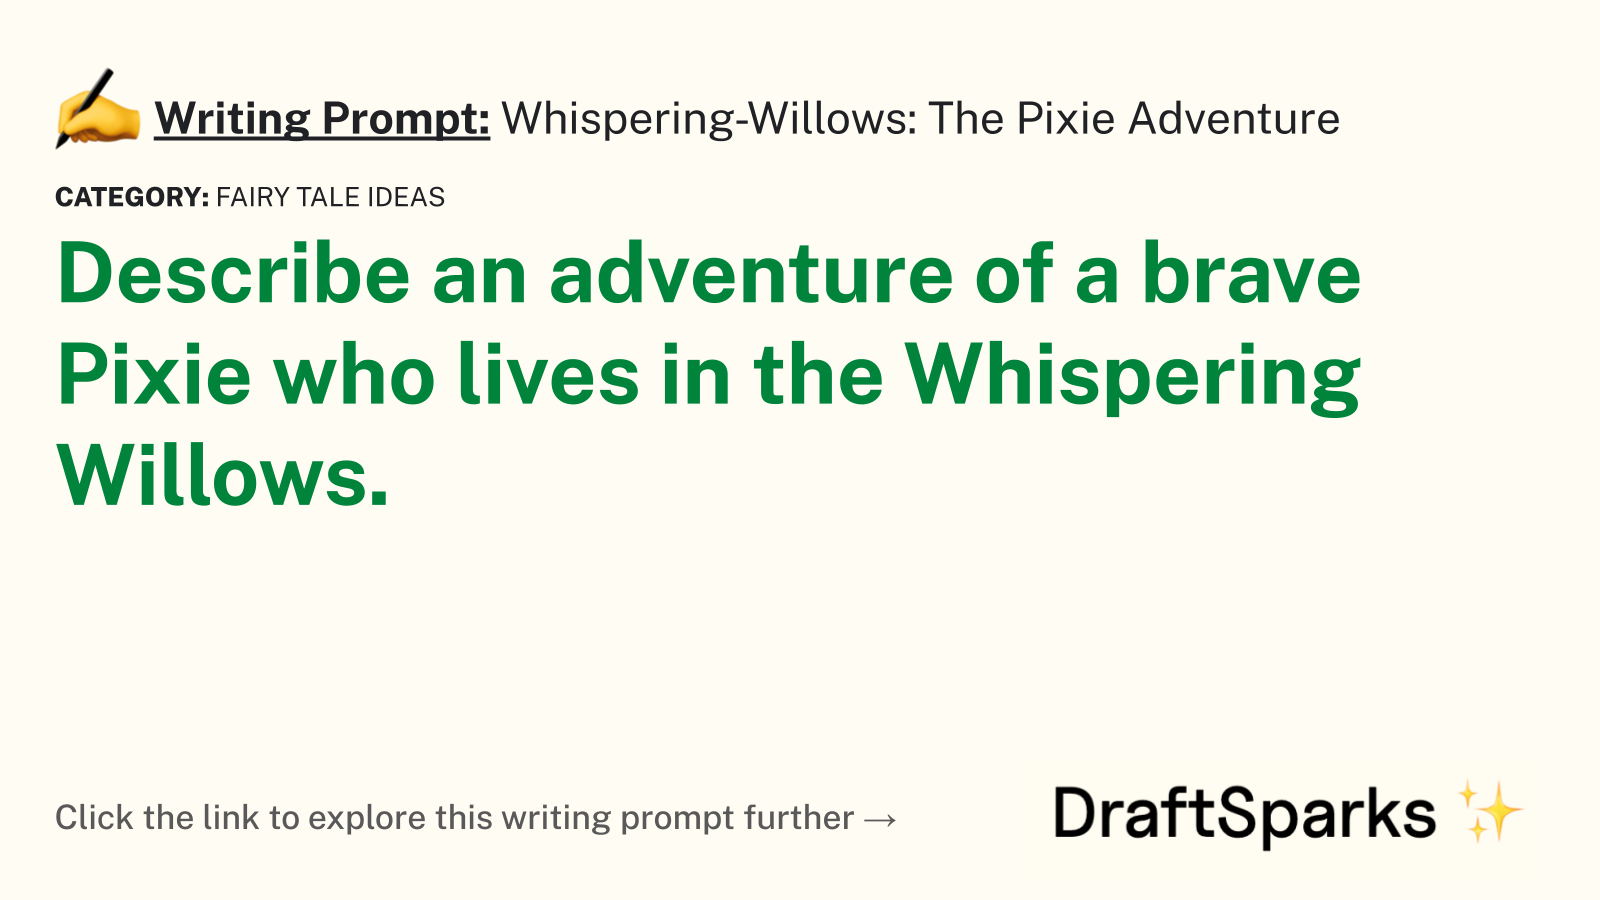 Whispering-Willows: The Pixie Adventure